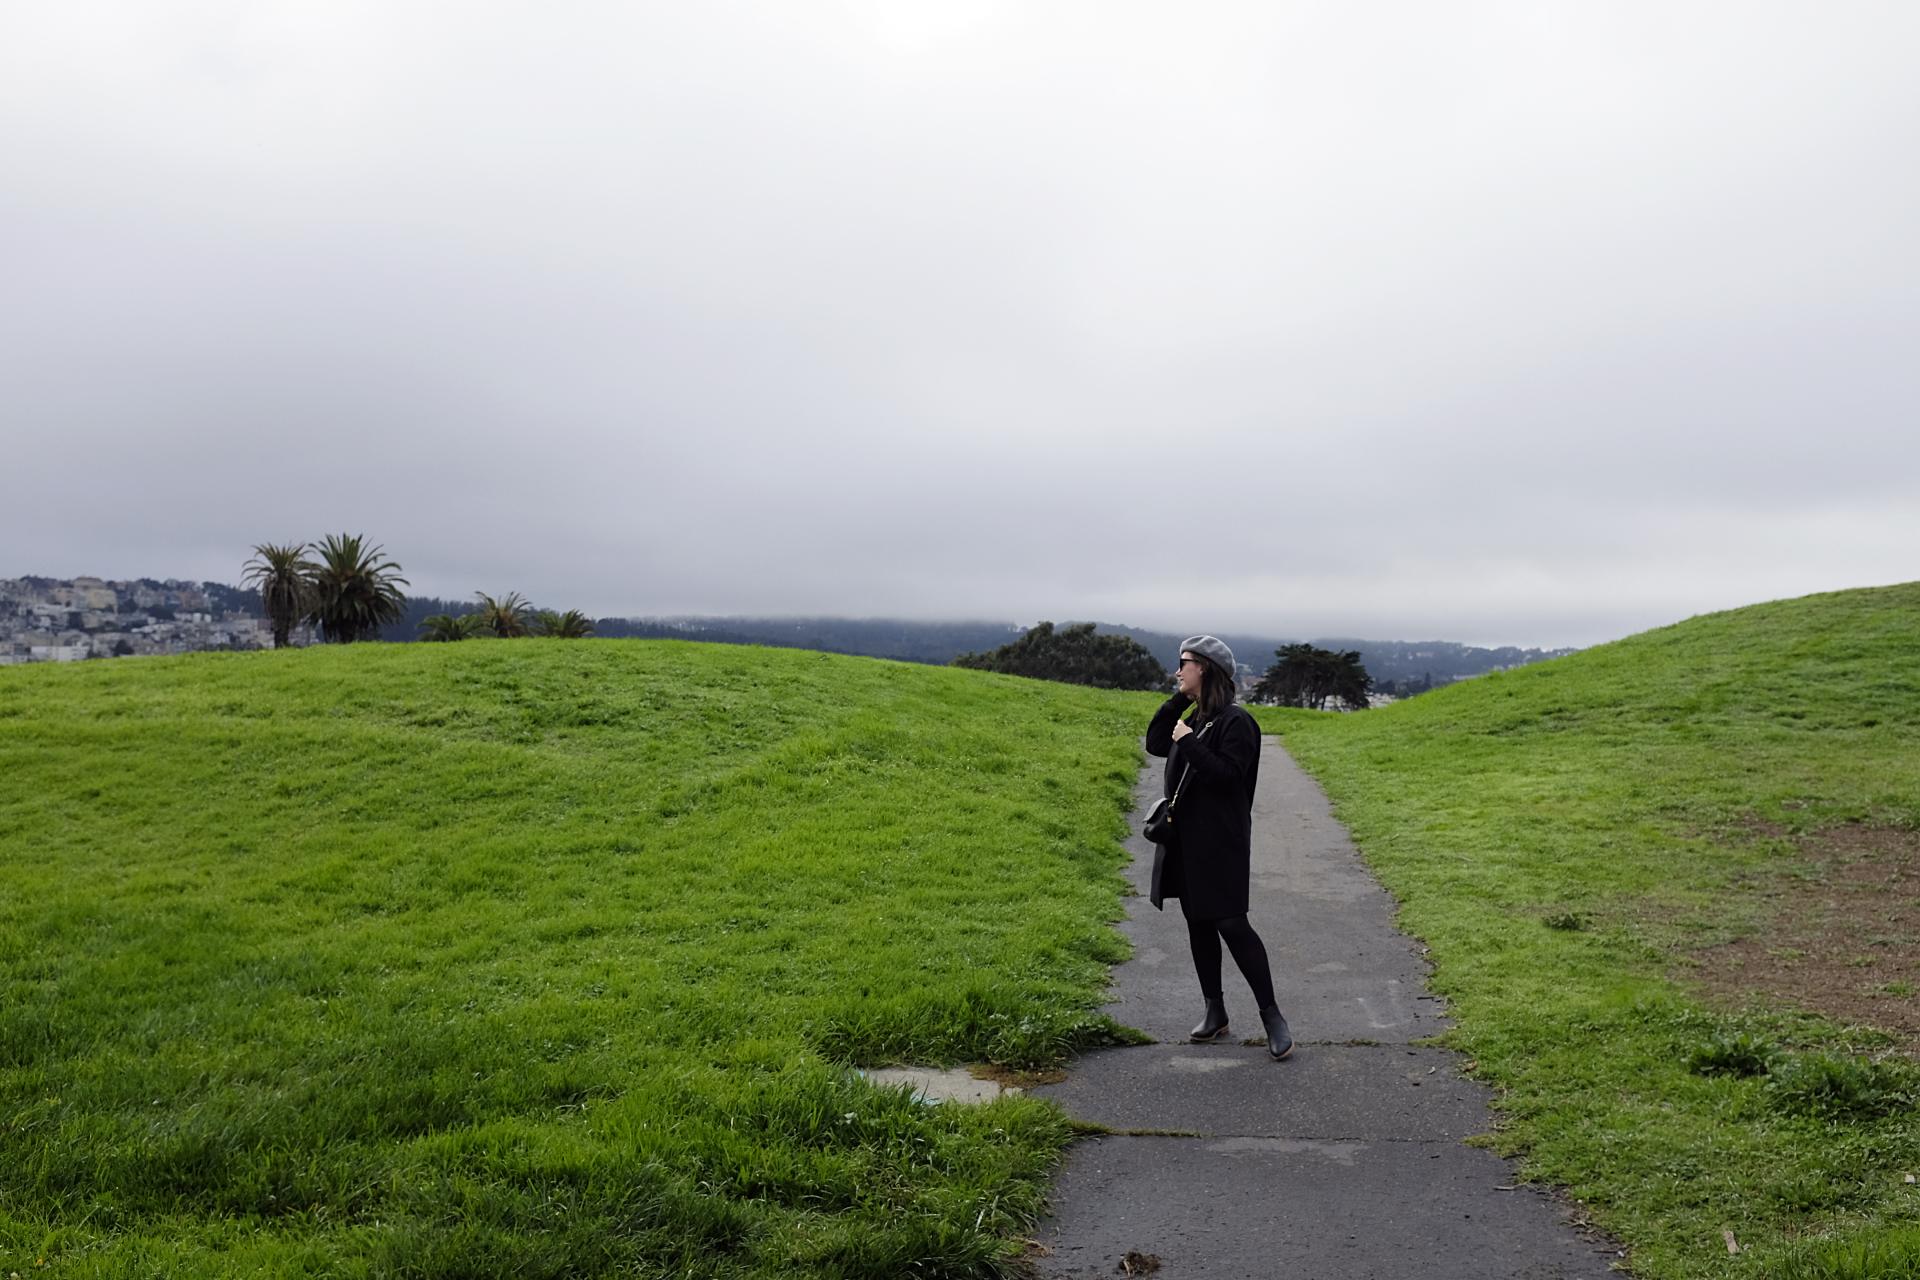 Alyssa stands in a green field in San Francisco, wearing all black and grey, black boots, and a beret. She is looking to her right